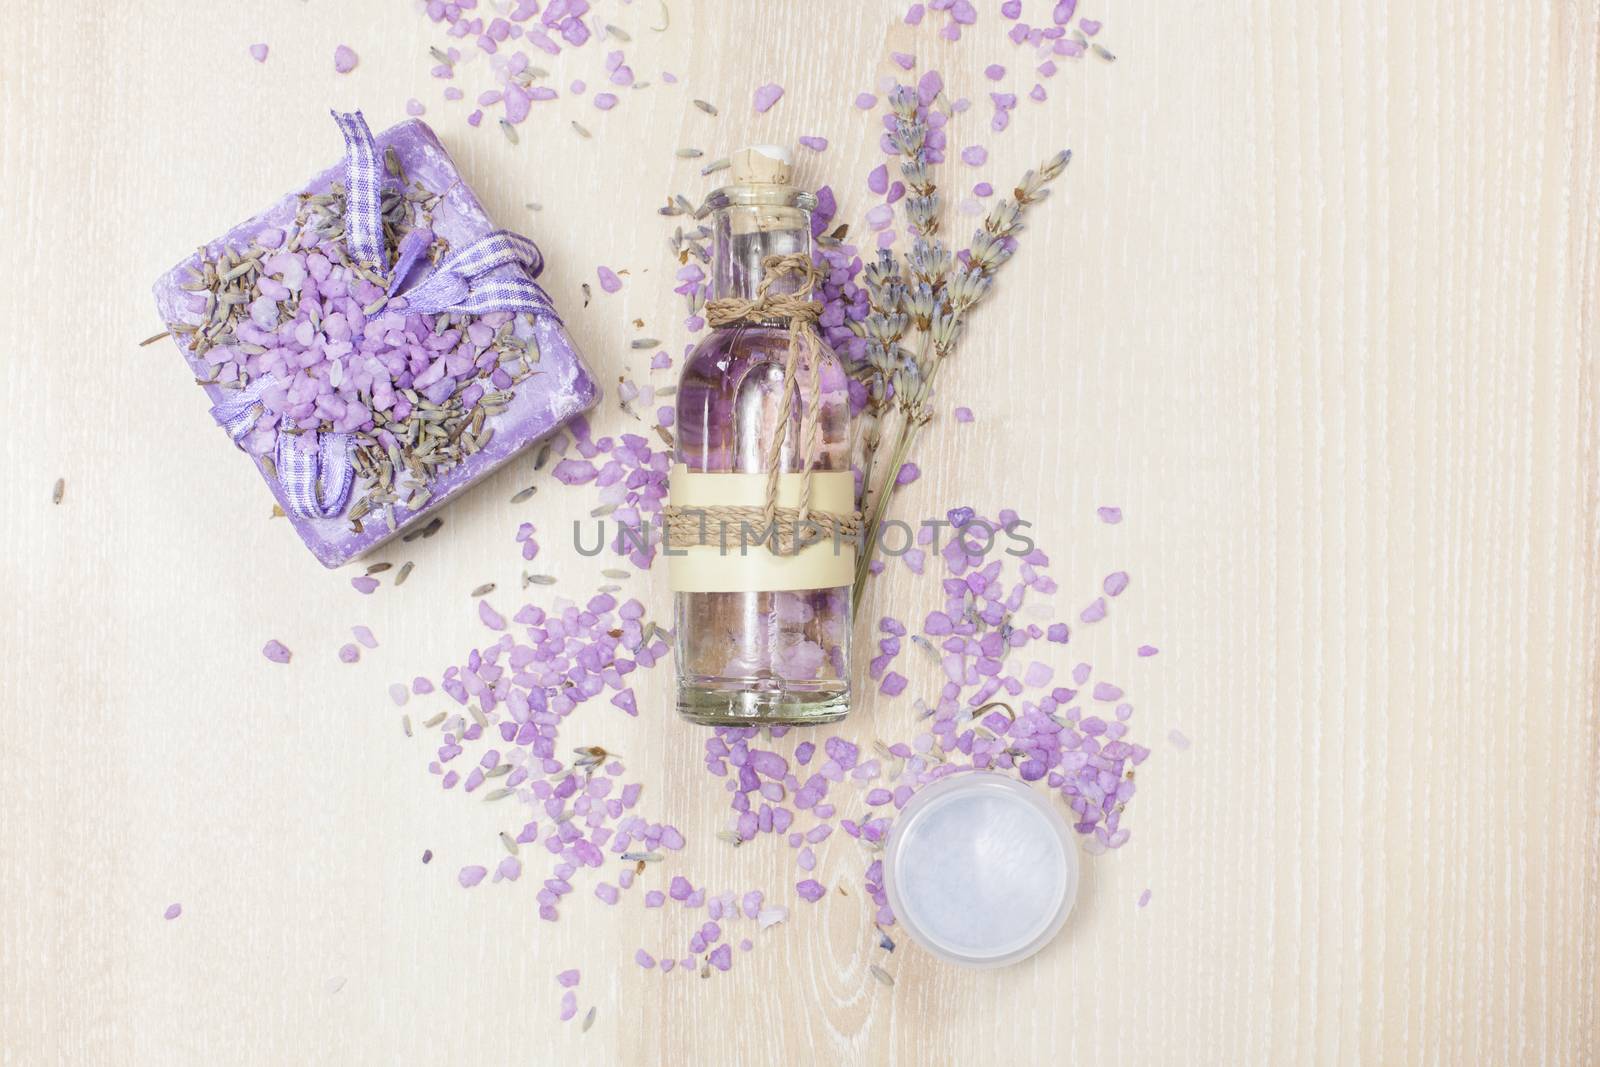 Lavender Beauty Products by Slast20